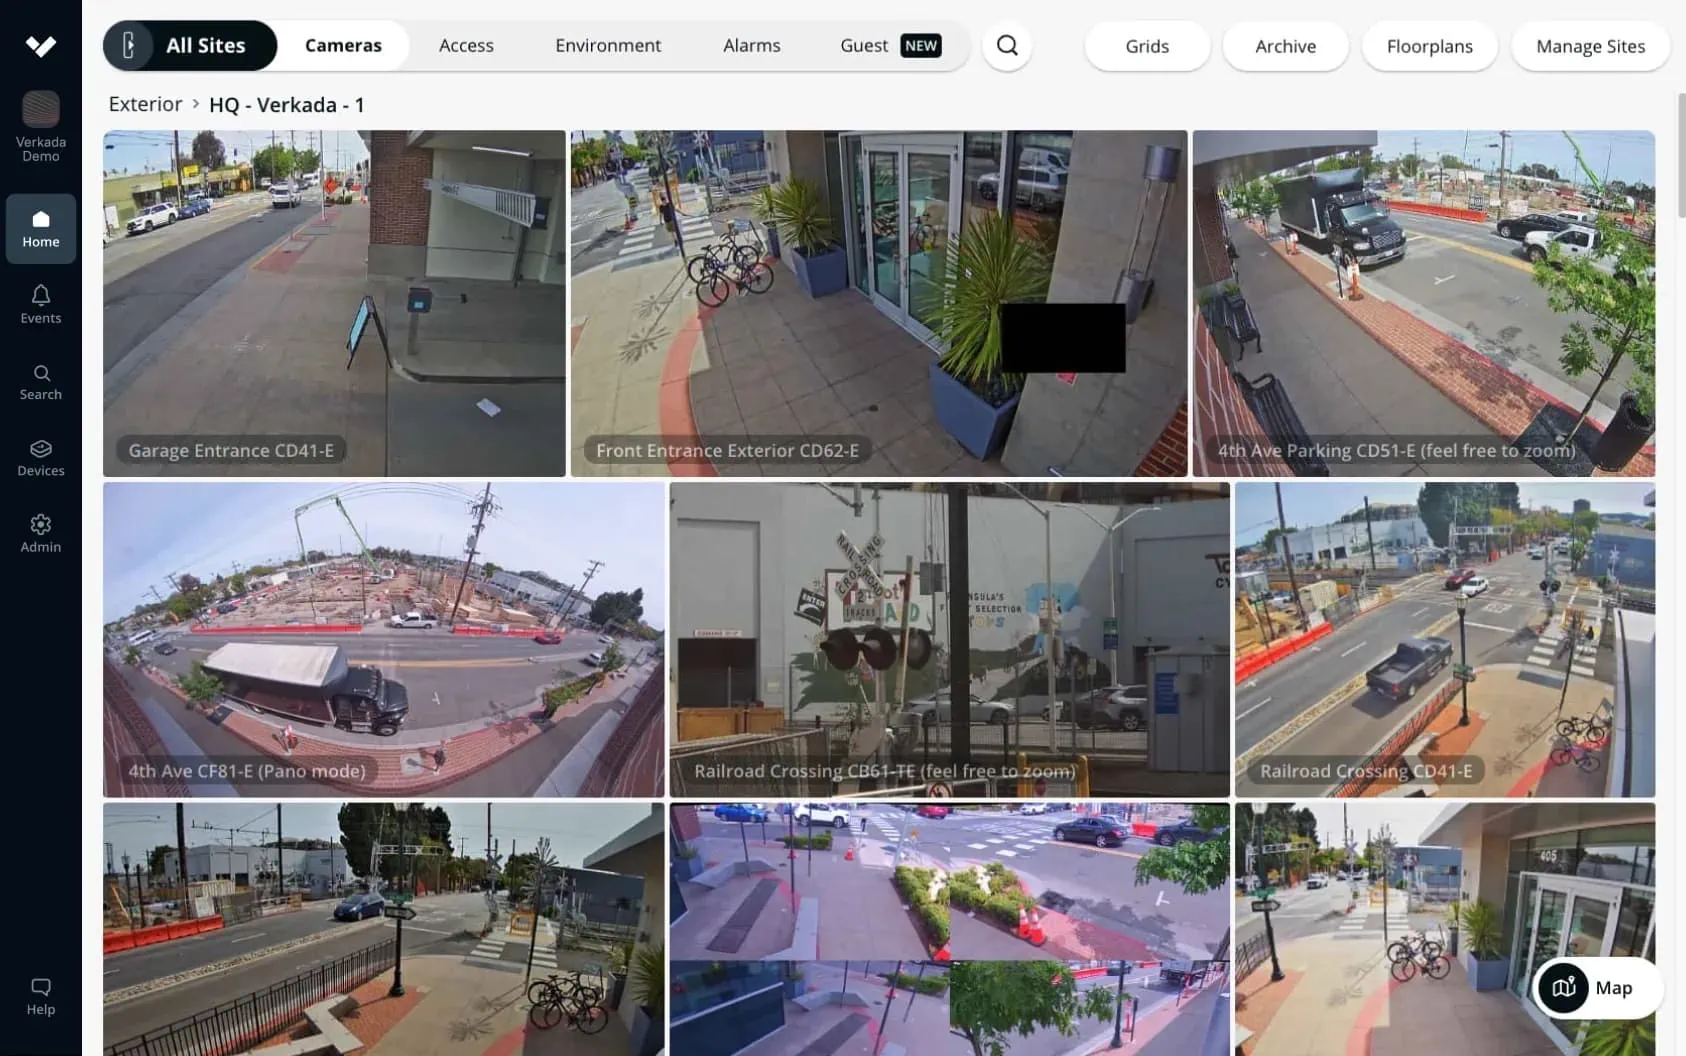 Command interface displaying footage captured by AI security monitoring system